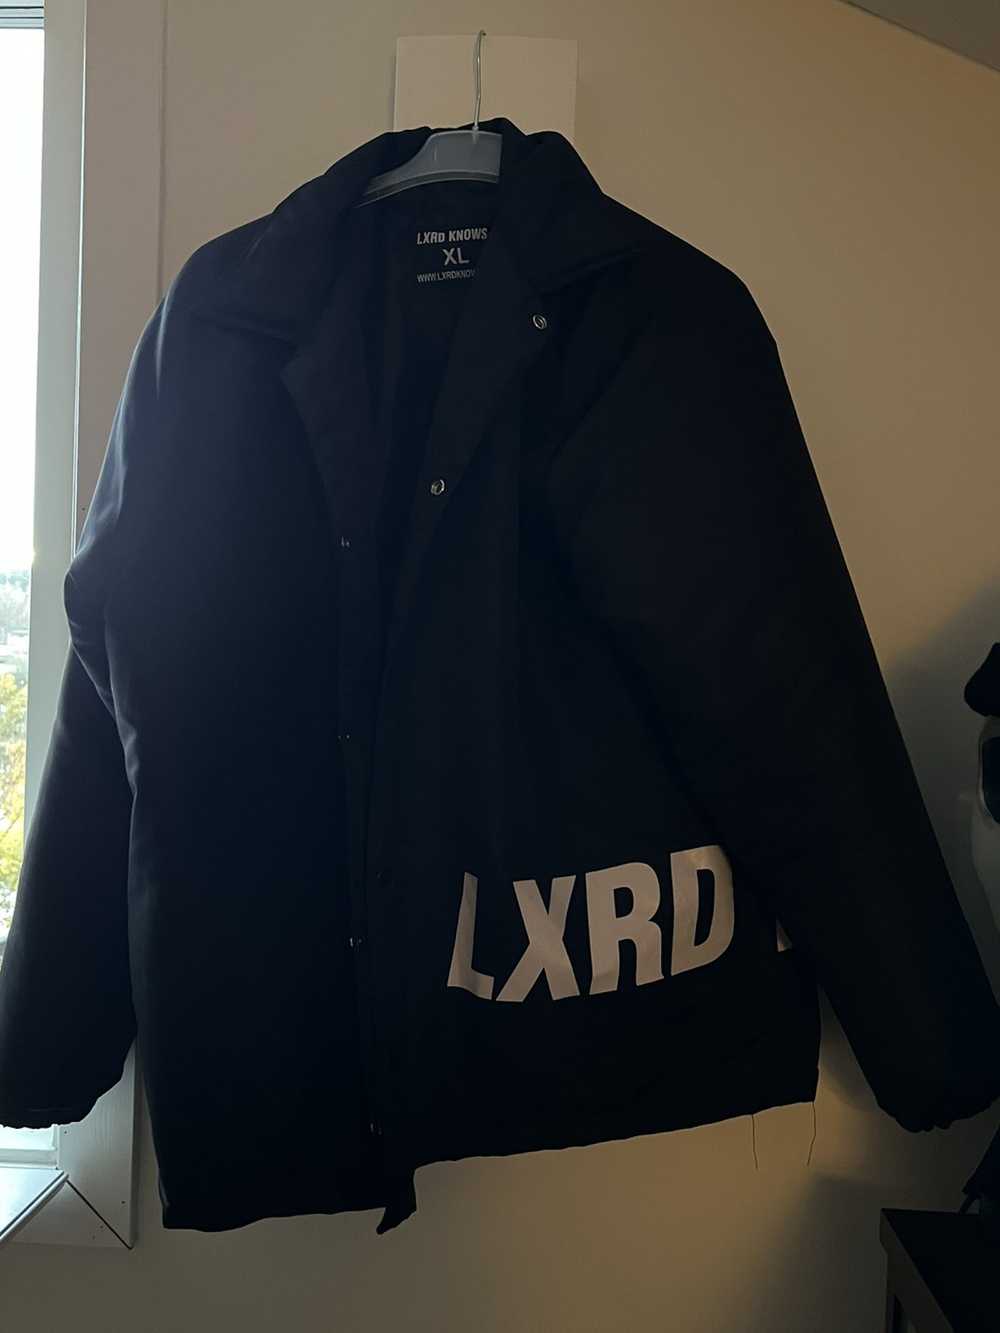 Lxrdknows Lxrd Knows Jacket - image 2